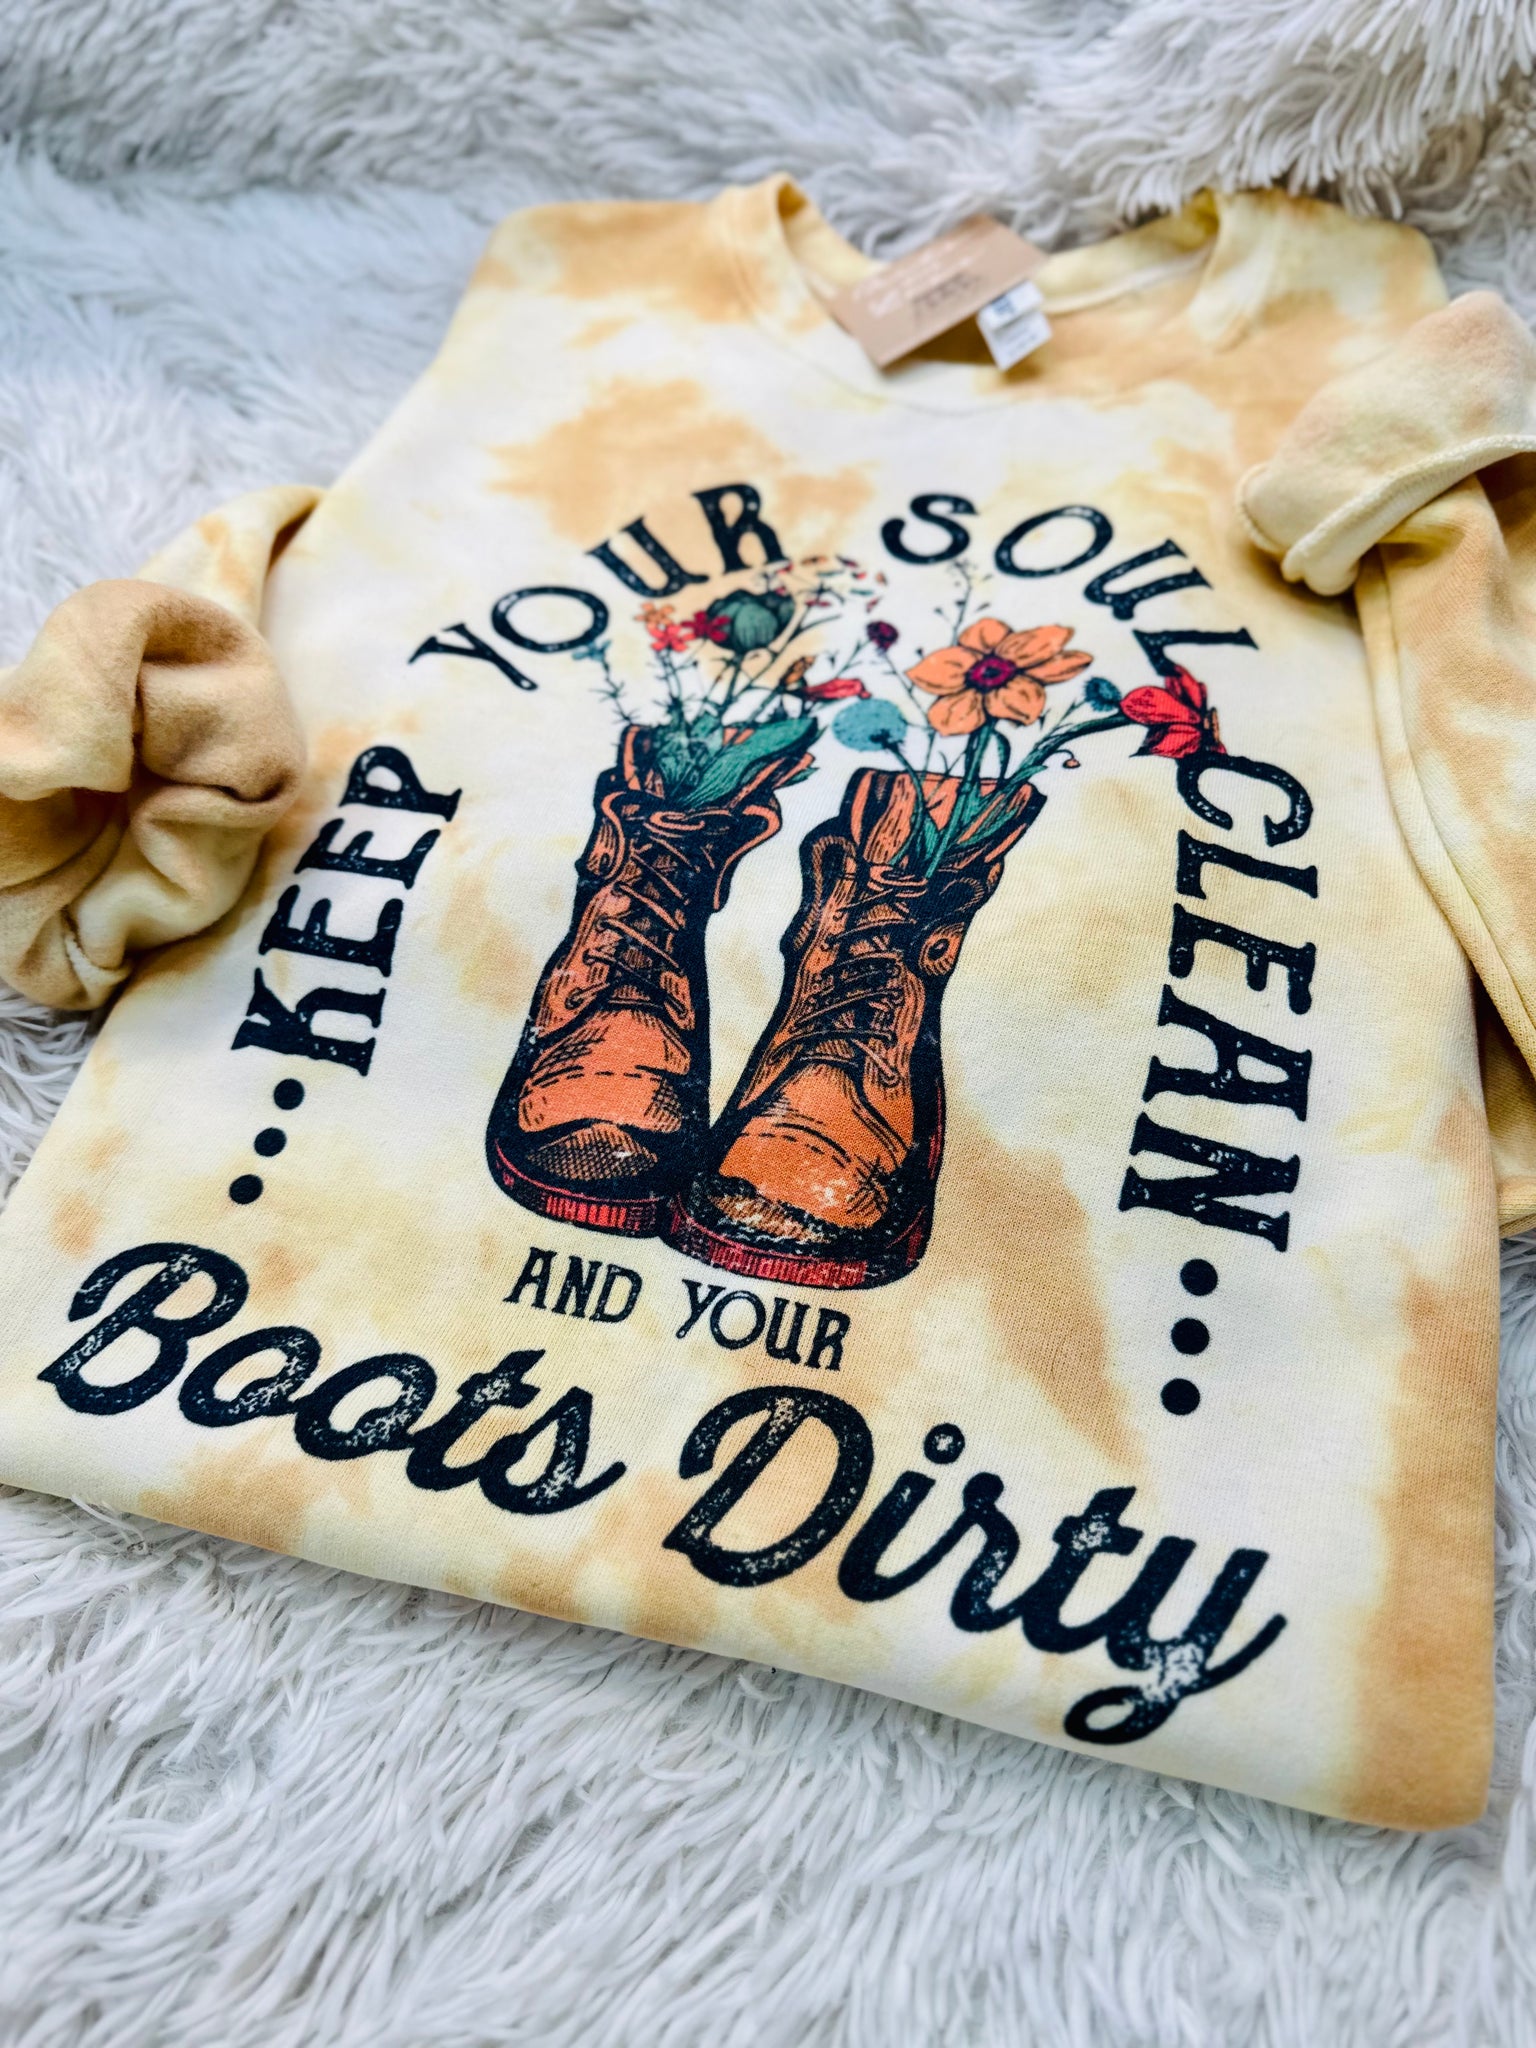 Soul Clean Boots Dirty Can Koozie